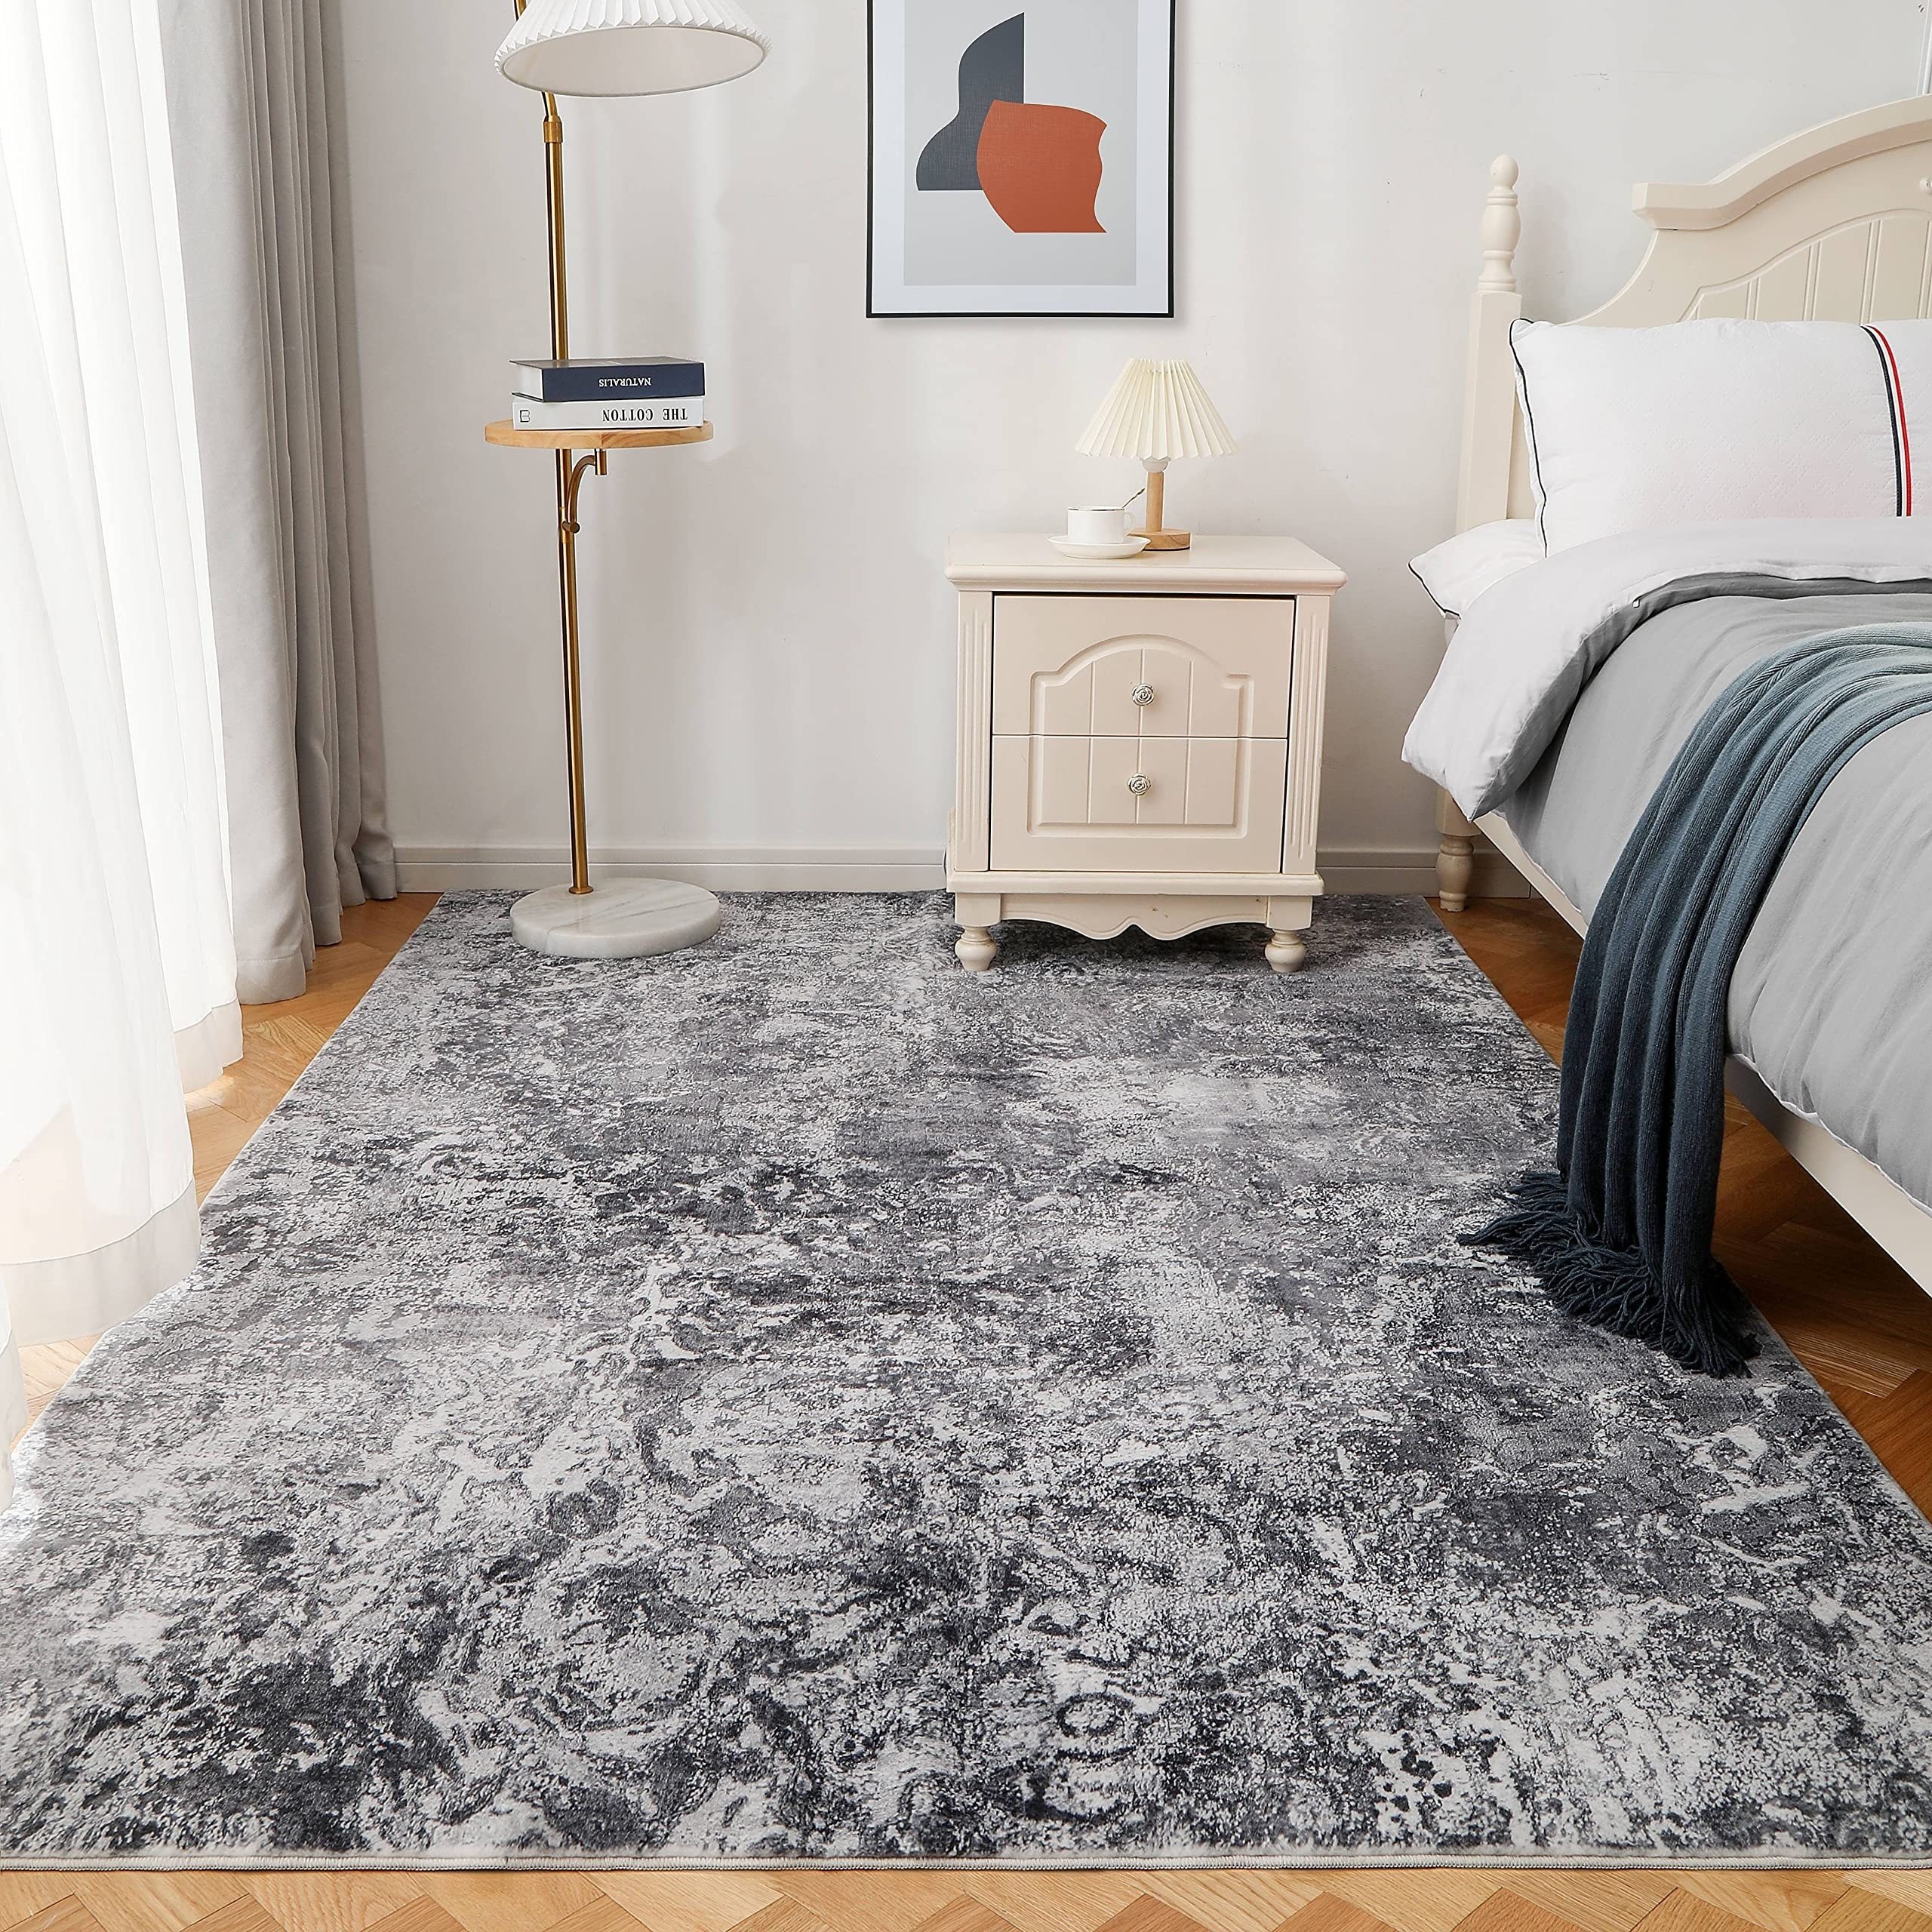 

Area Rug Living Room Rugs: Indoor Abstract Soft Fluffy Pile Large Carpet With Low Shaggy For Bedroom Dining Room Home Office Decor Under Kitchen Table Washable - Retro Gray